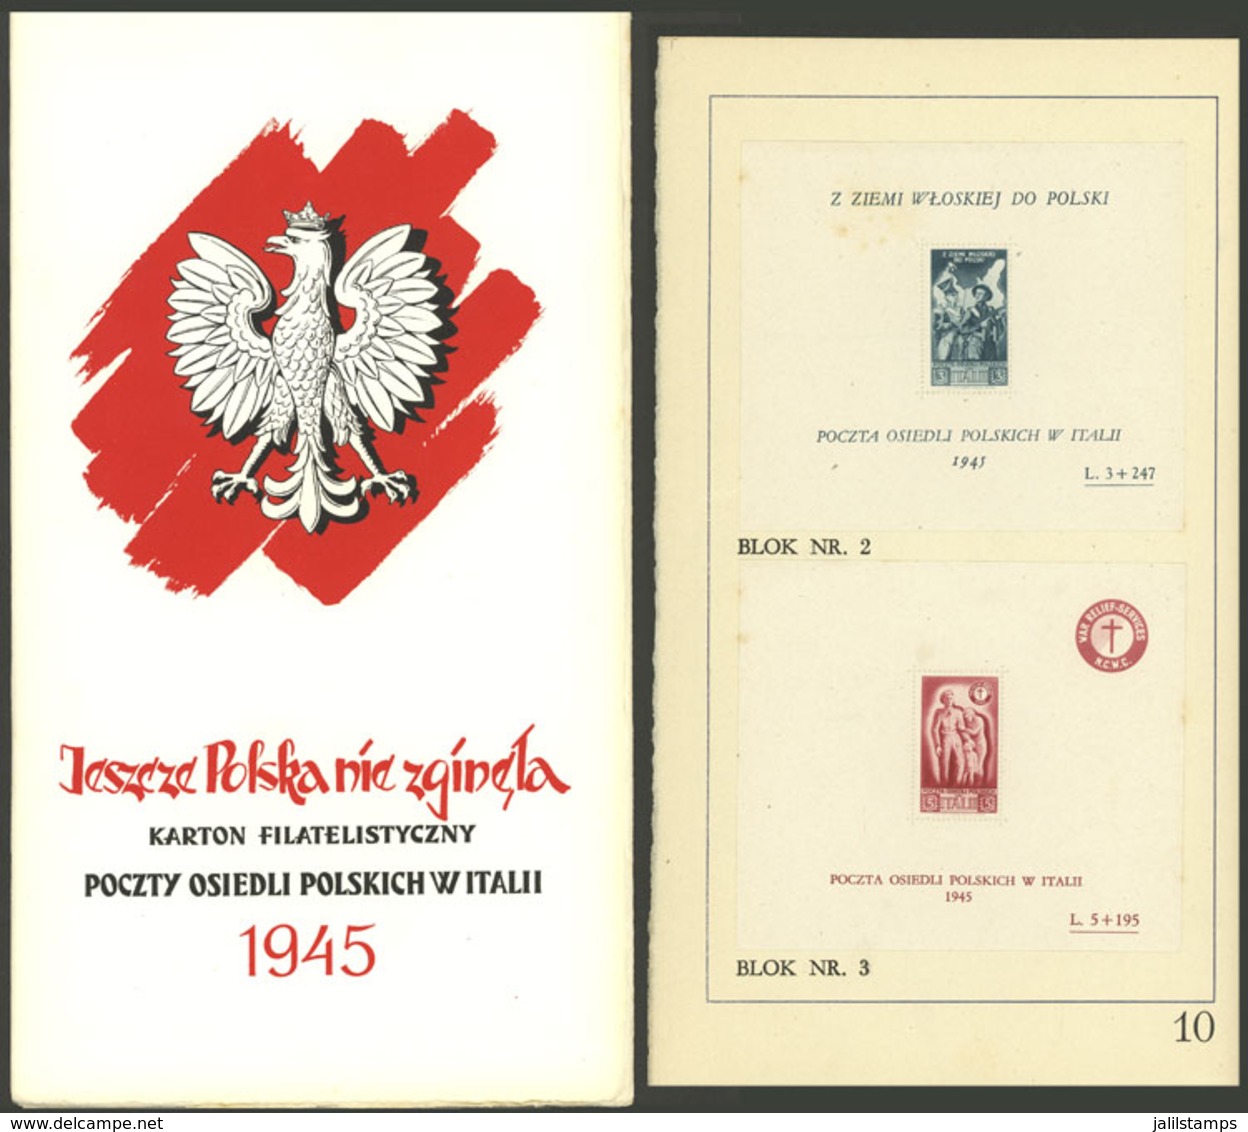 ITALY - POLISH CORPS: Fundraising Folder With 10 Pages Containing 4 Stamps And 3 Souvenir Sheets (glued), Excellent Qual - Non Classés